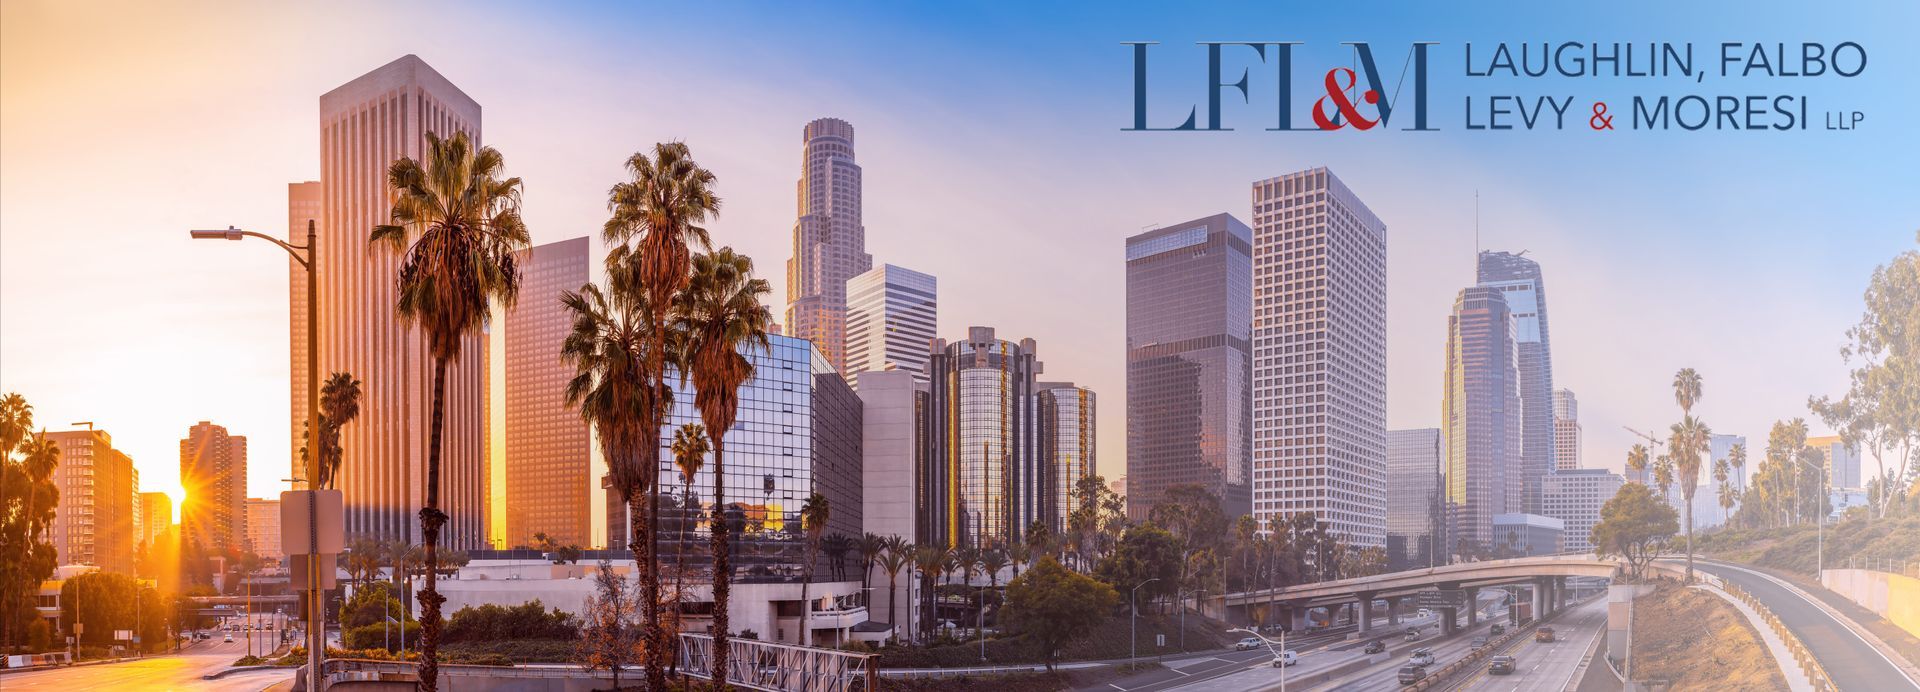 Los Angeles and LFLM